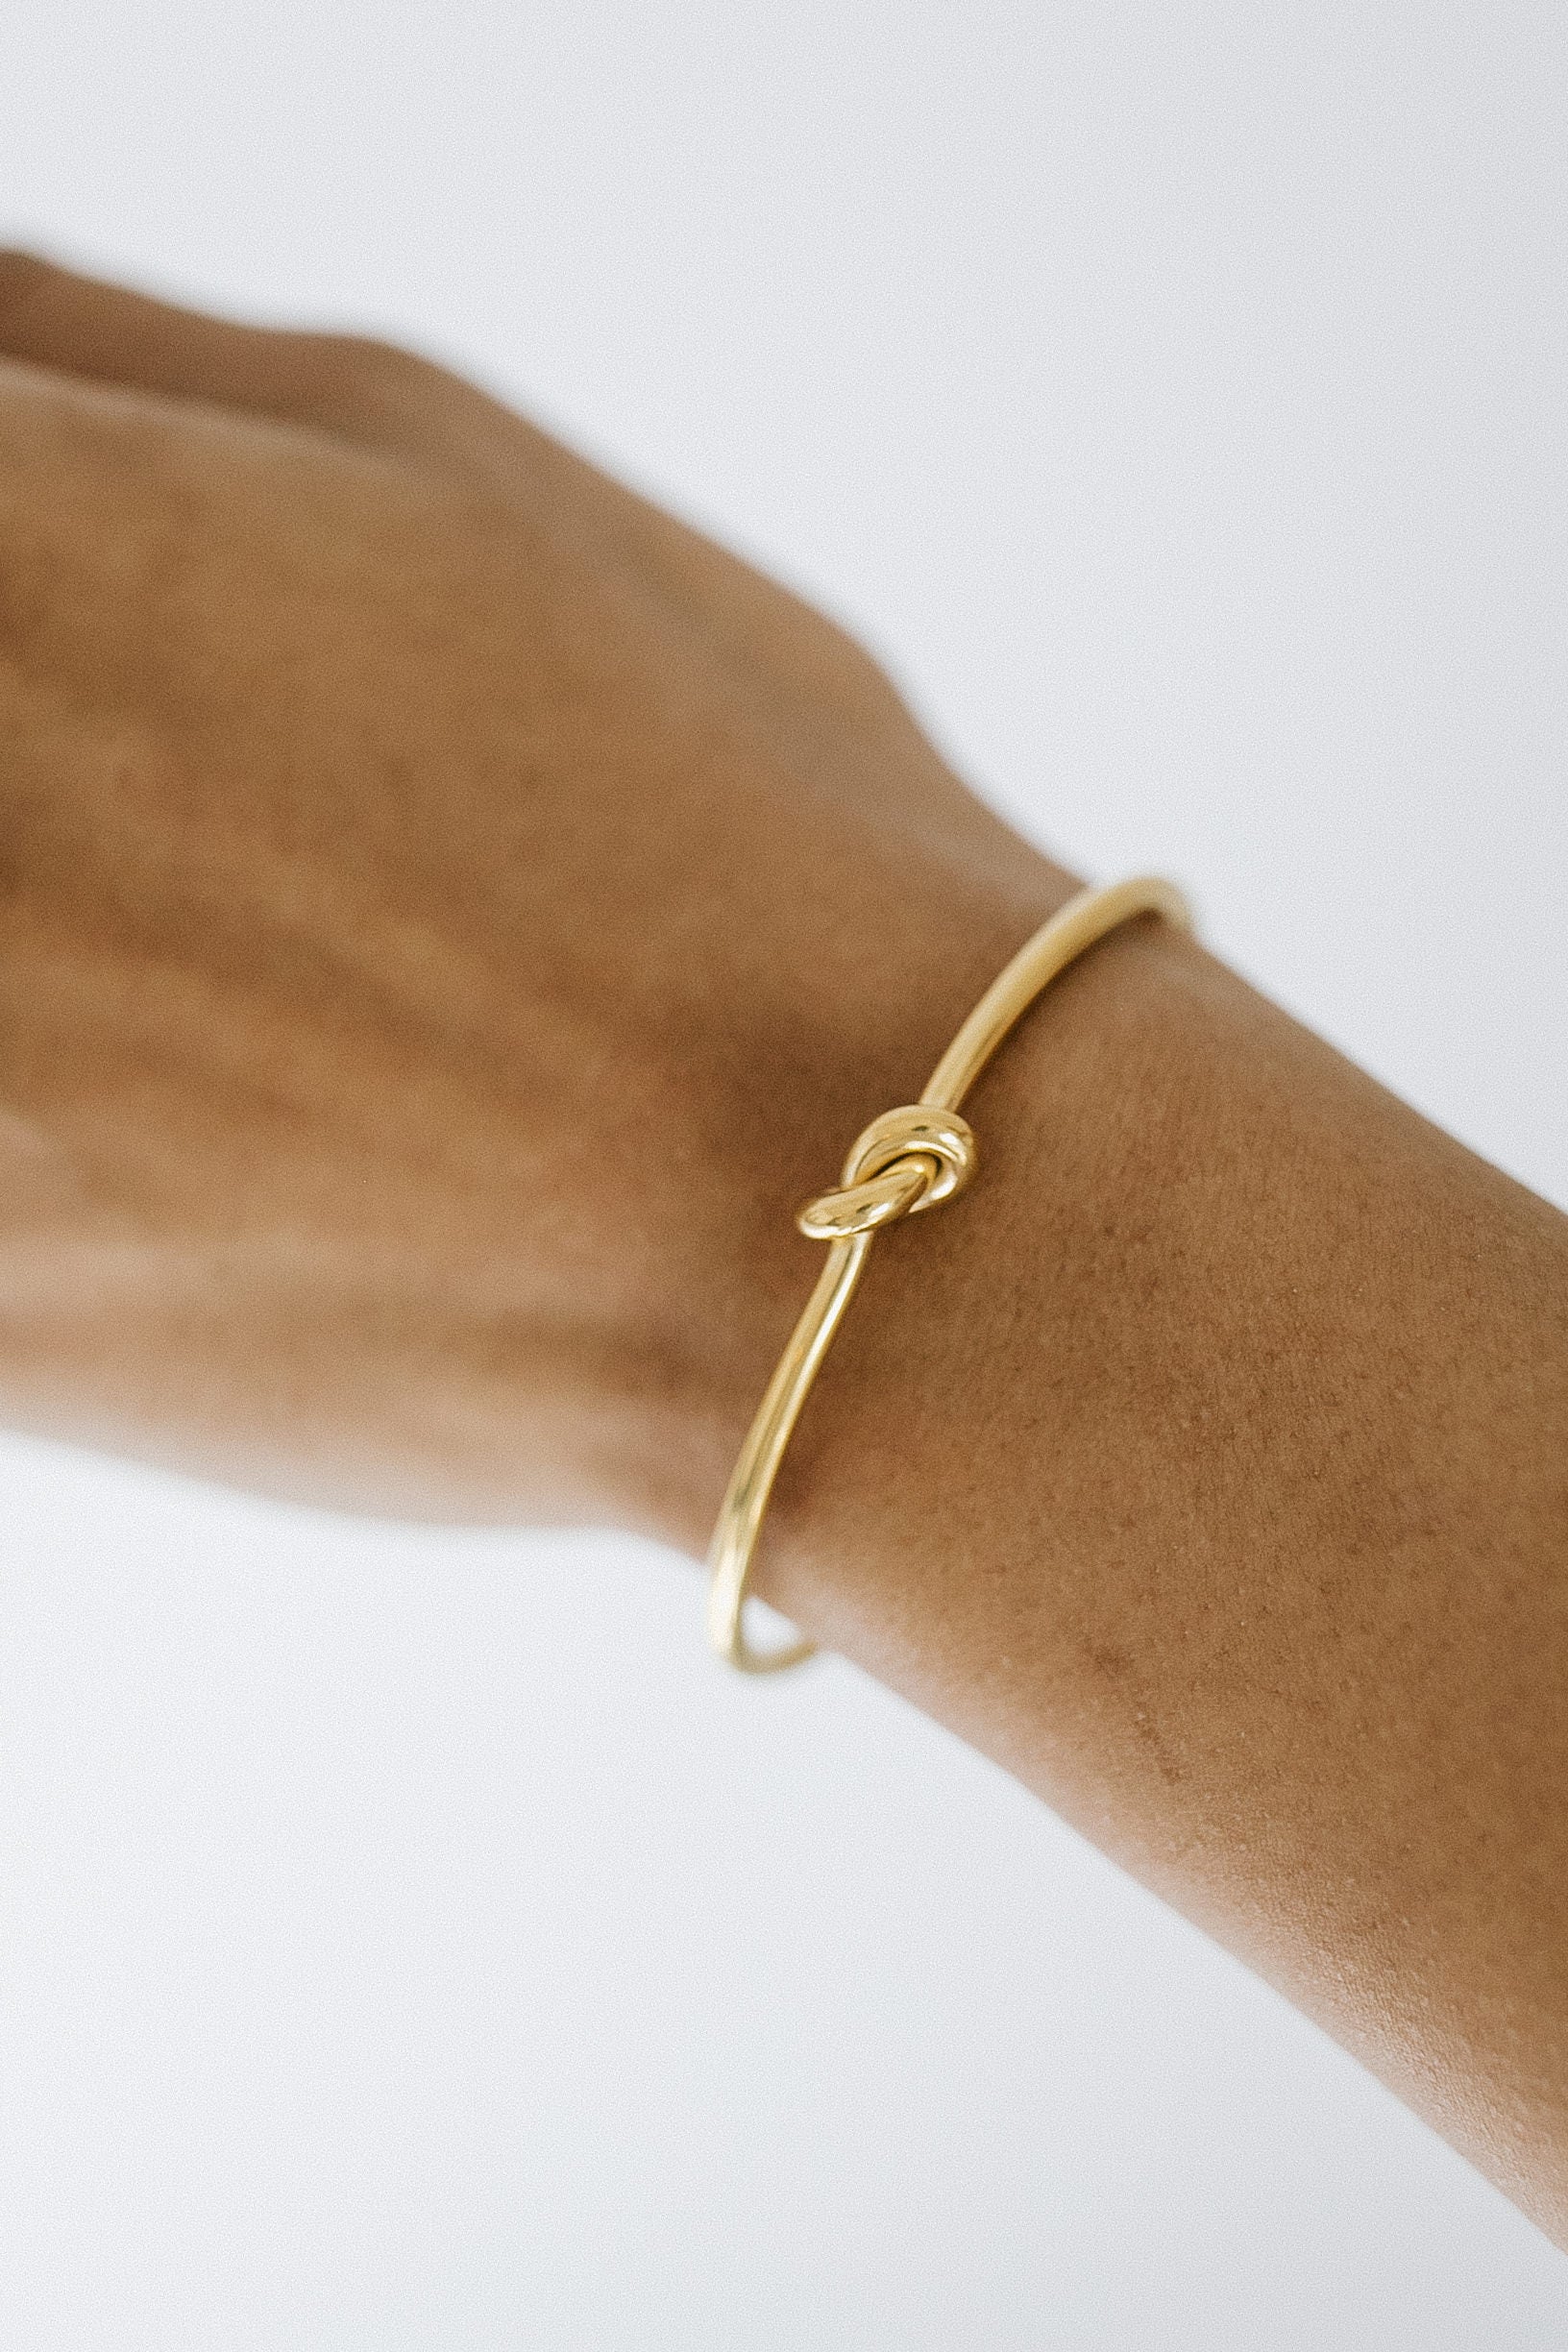 Doree Knotted Cuff - Gold